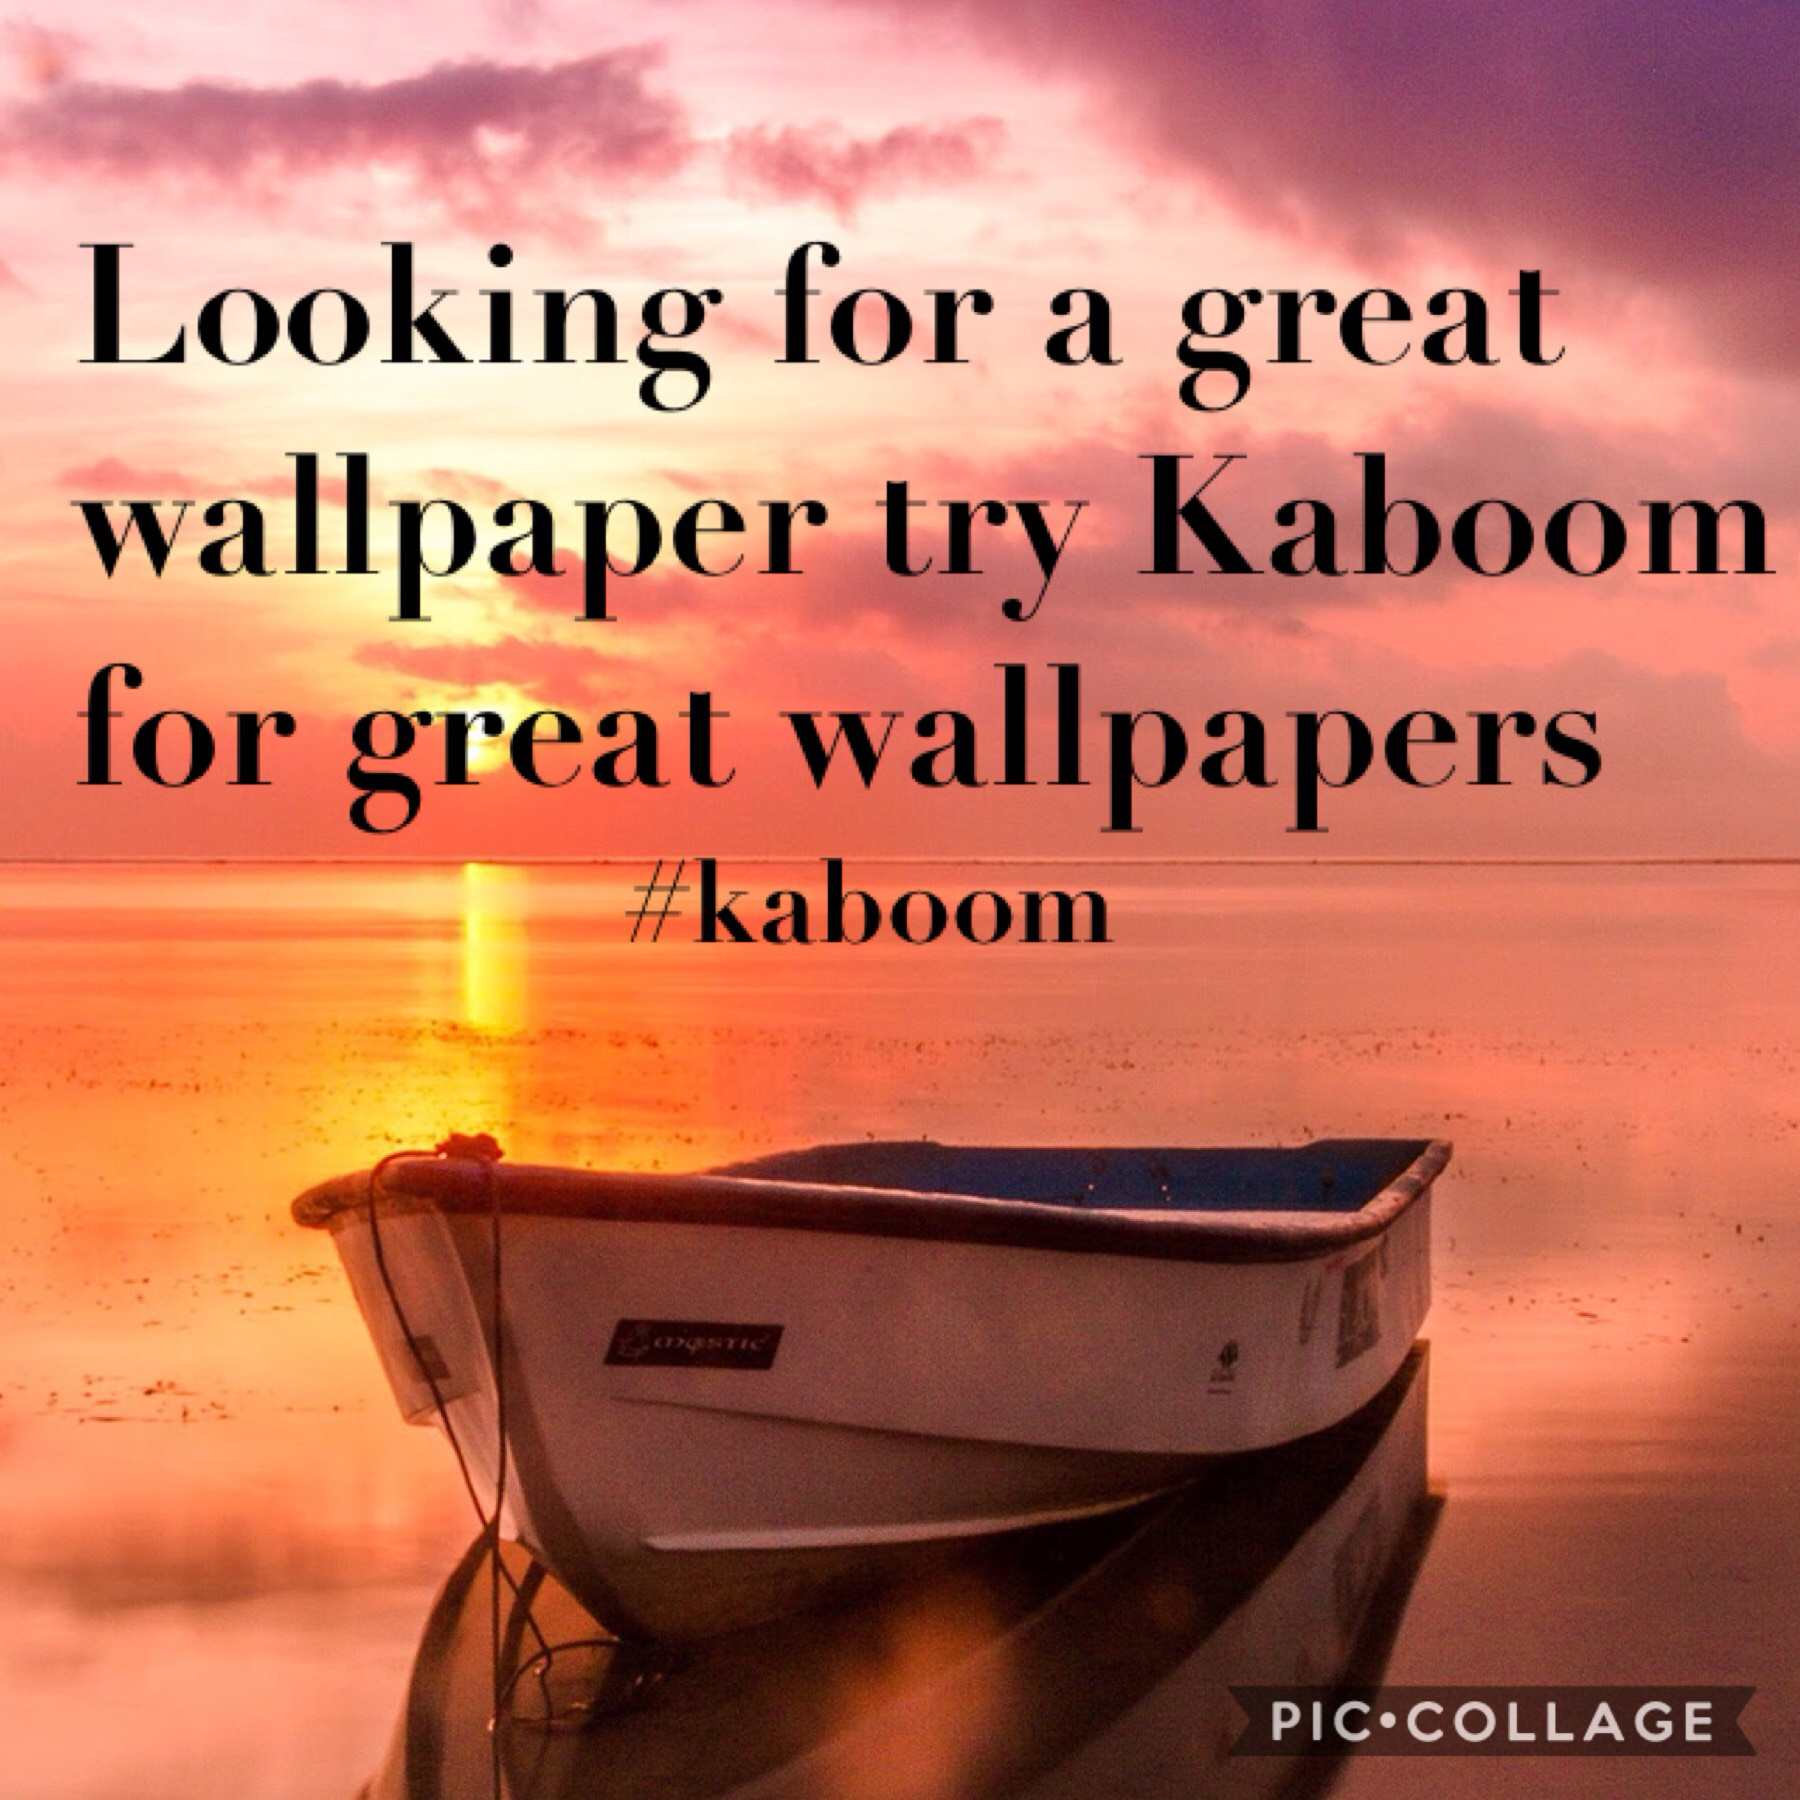 #kaboom 
Try out kaboom for some breathtaking wallpapers!